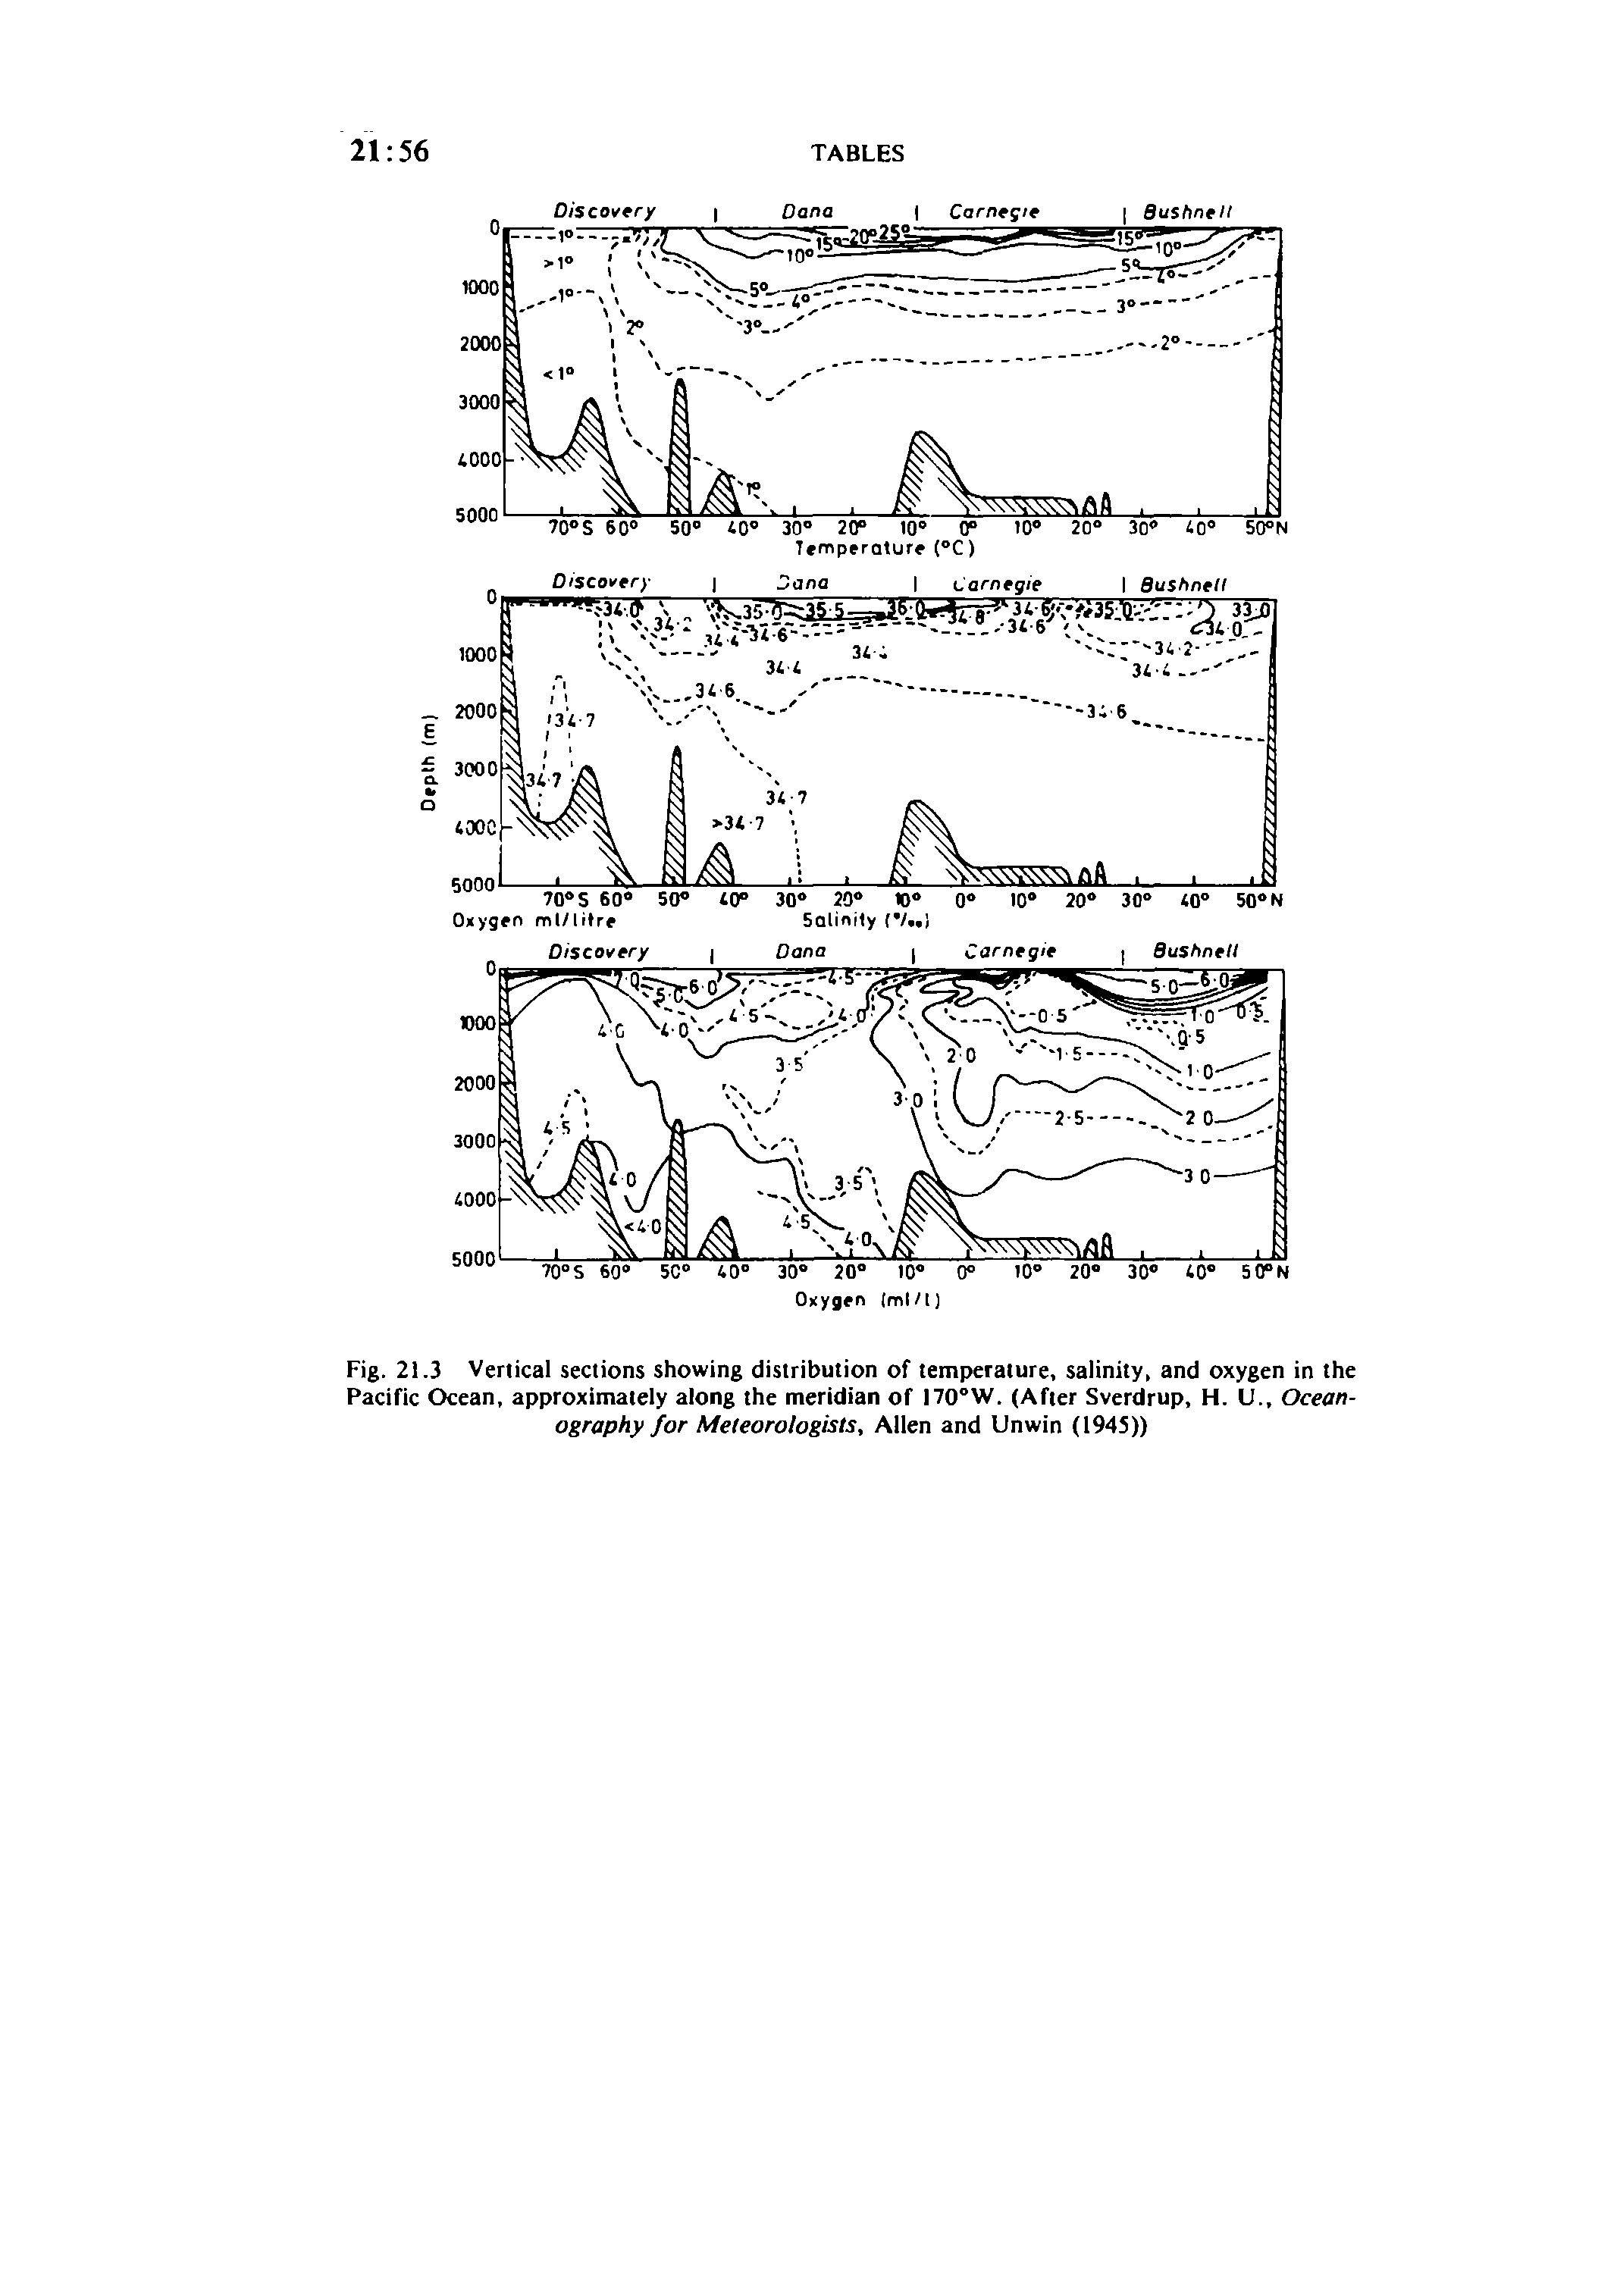 Fig. 21.3 Vertical sections showing distribution of temperature, salinity, and oxygen in the Pacific Ocean, approximately along the meridian of I70°W. (After Sverdrup, H. U., Oceanography for Meteorologists, Allen and Unwin (1945))...